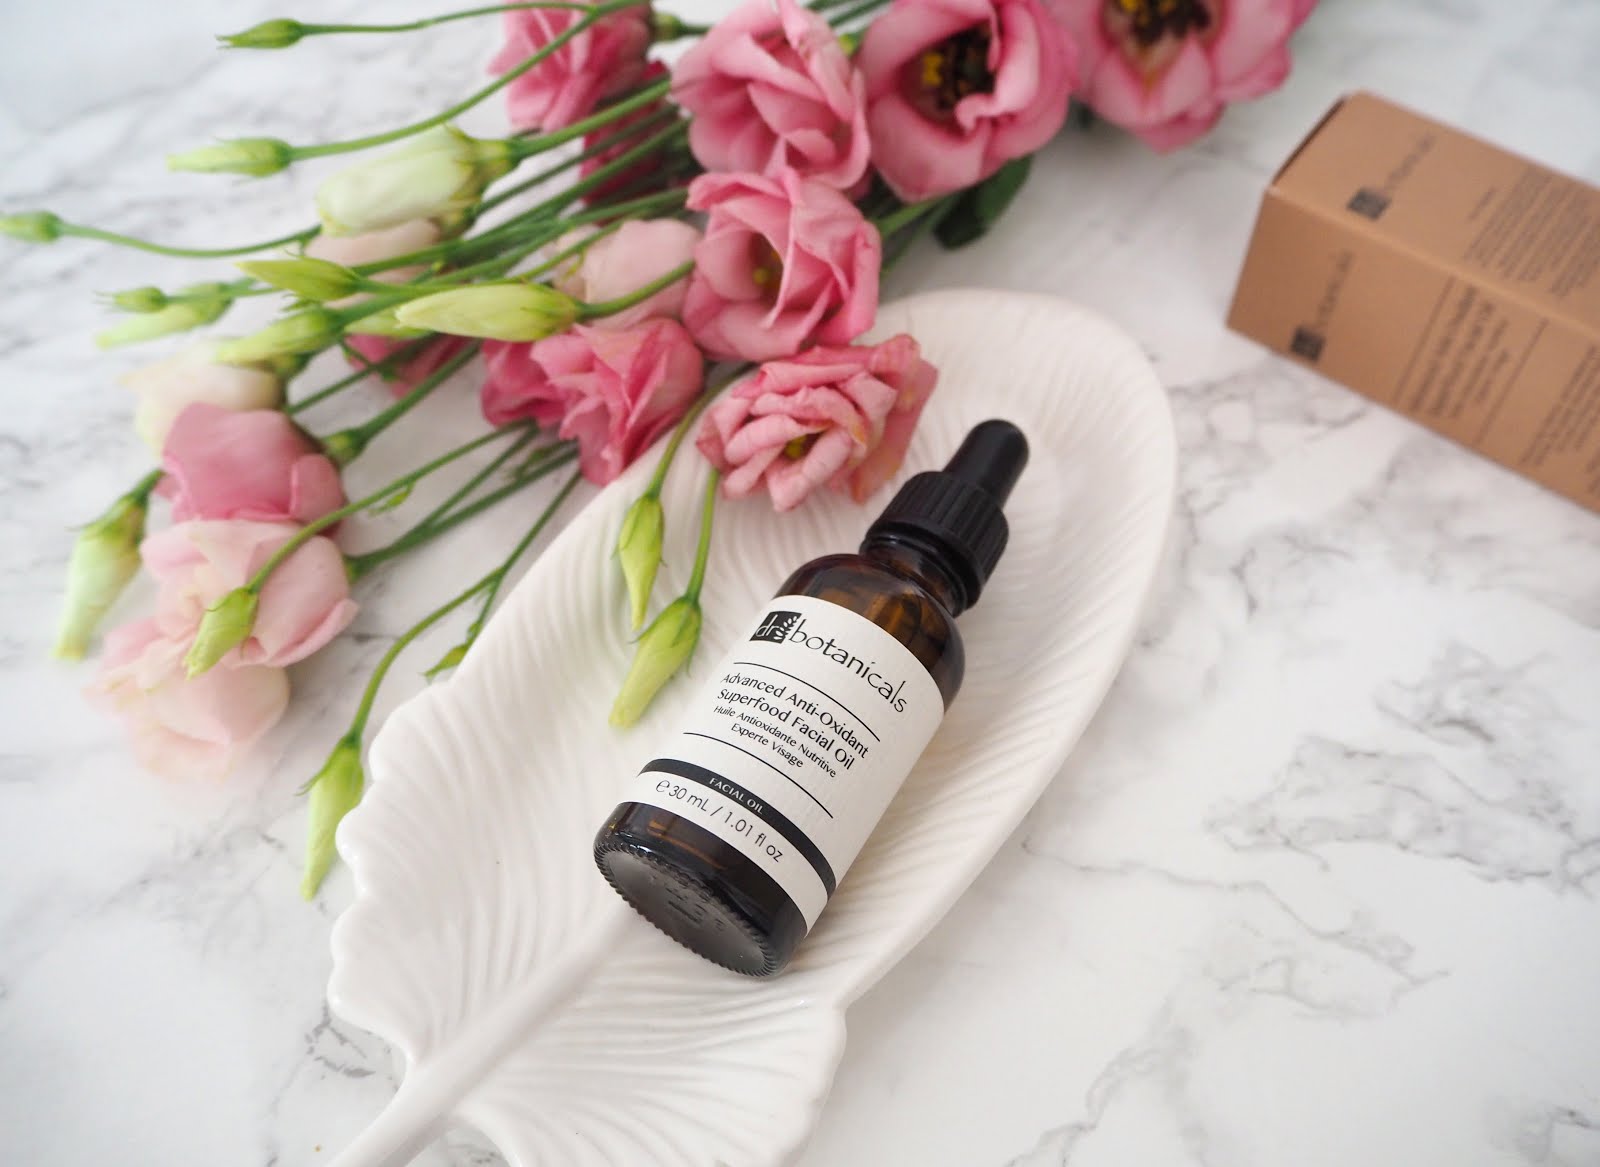 Dr Botanicals Advanced Anti-Oxidant Superfood Facial Oil, Katie Kirk Loves, Beauty Blogger, Dr Botanicals Skincare, UK Blogger, Skincare Review, Discount Code, Beauty Sleep, Facial Oil, Facial Treatment, Skincare Routine, Luxury Skincare Products